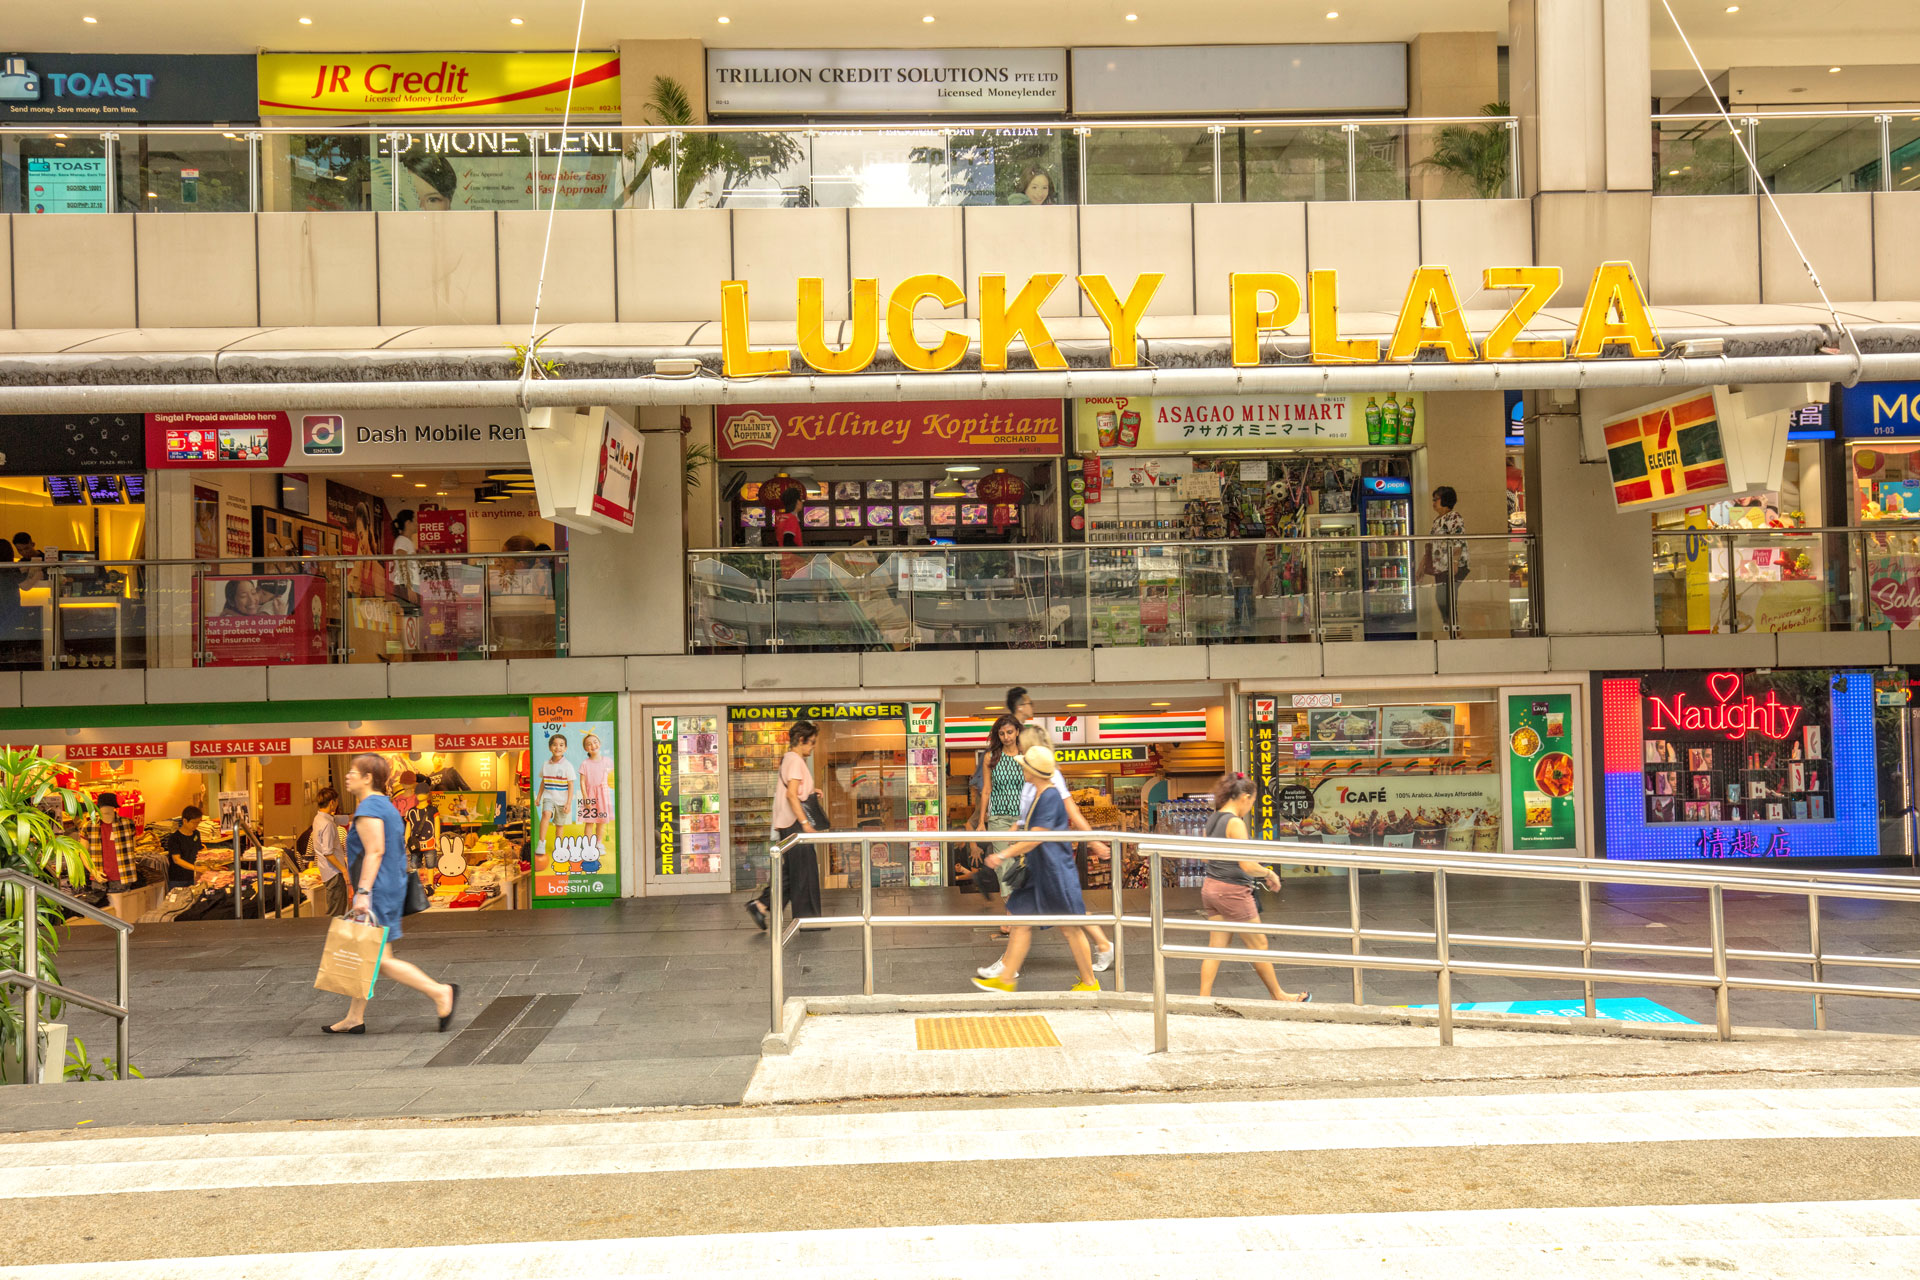 Shopping on a budget in Lucky Plaza